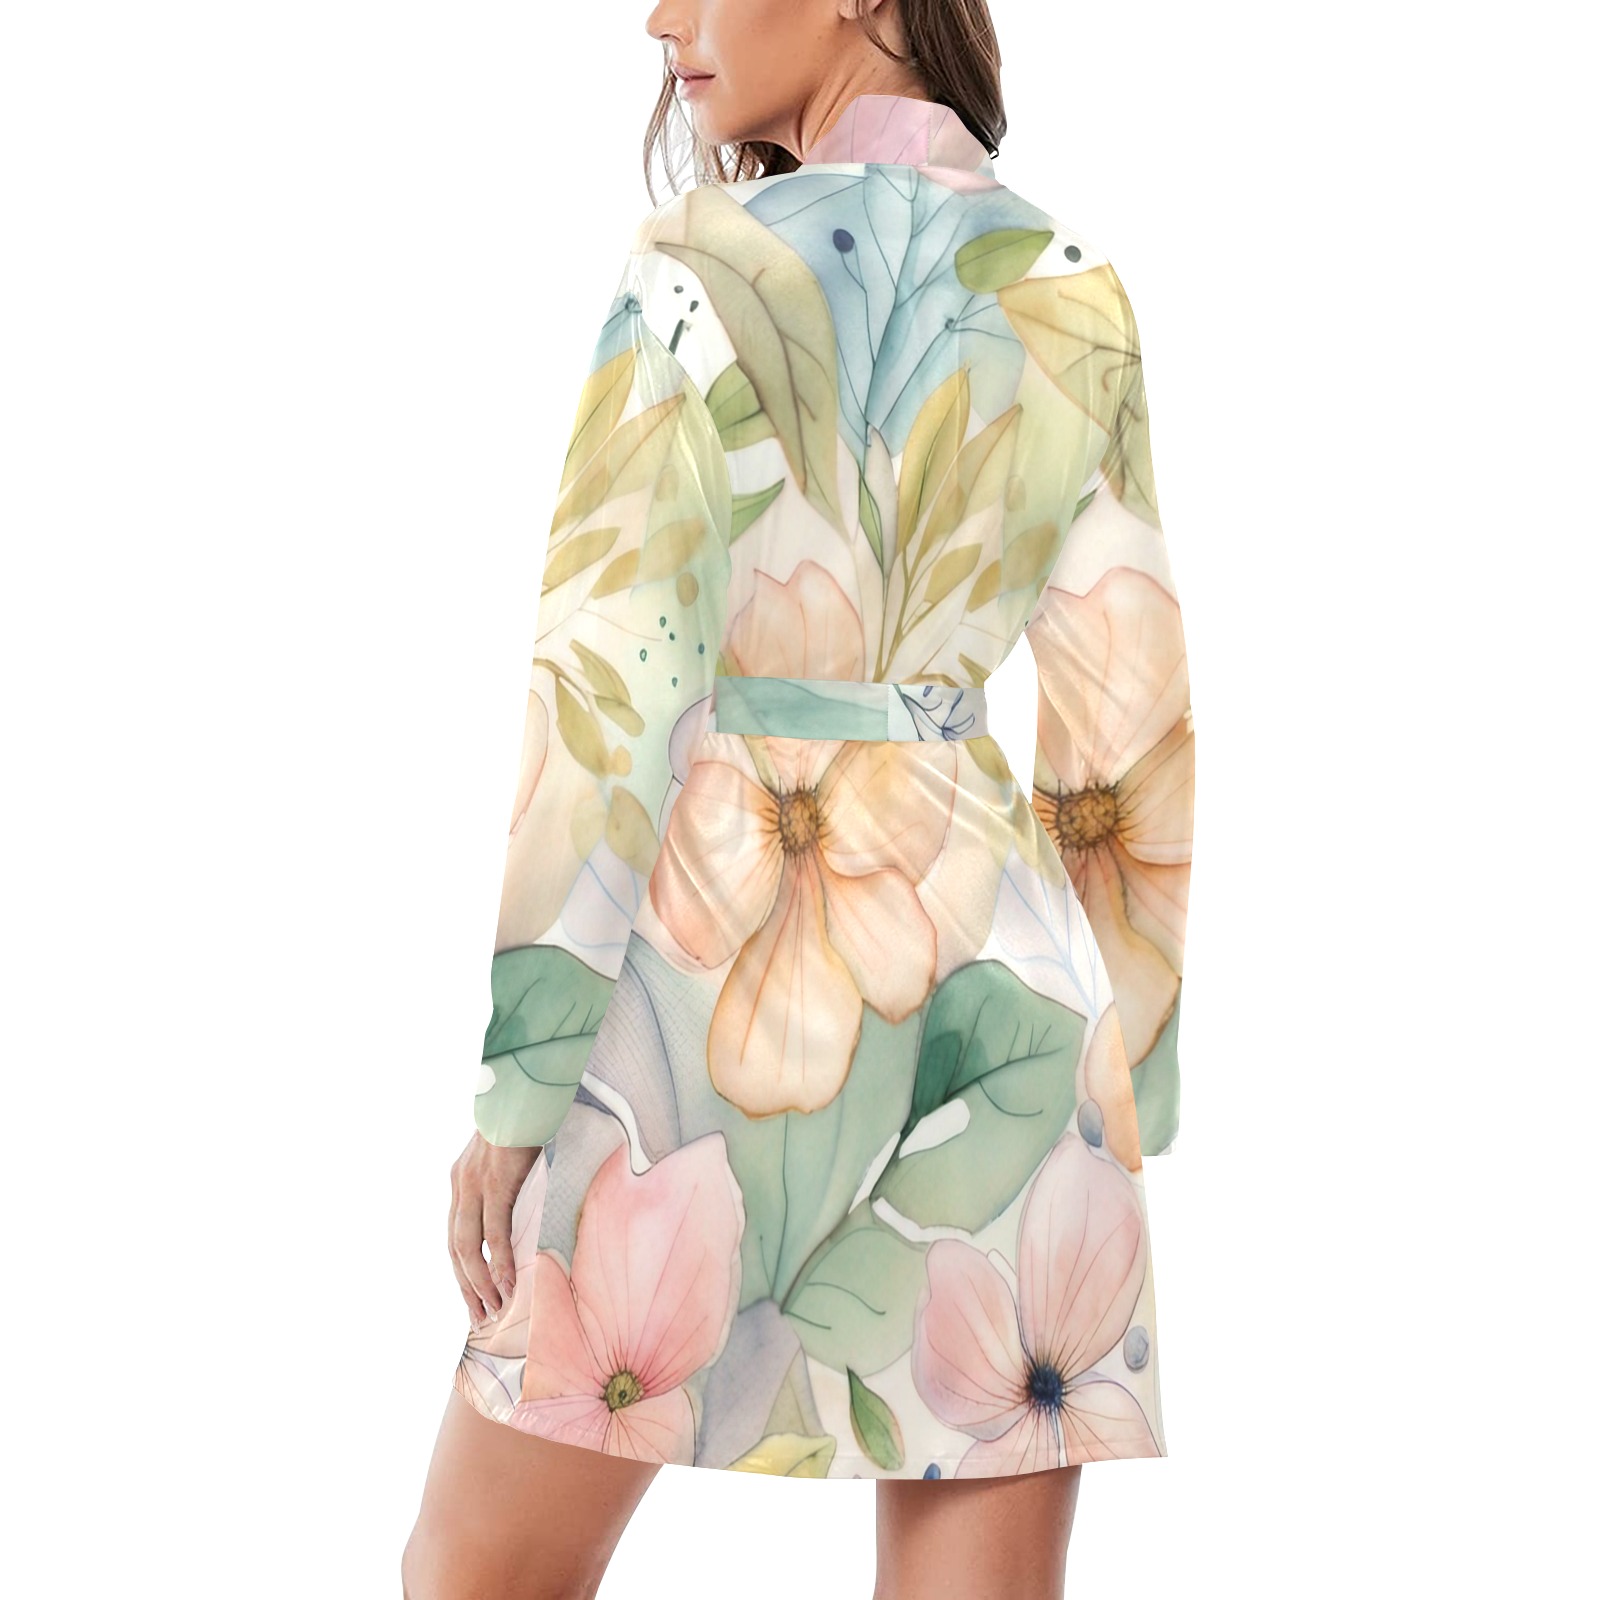 Watercolor Floral 1 Women's Long Sleeve Belted Night Robe